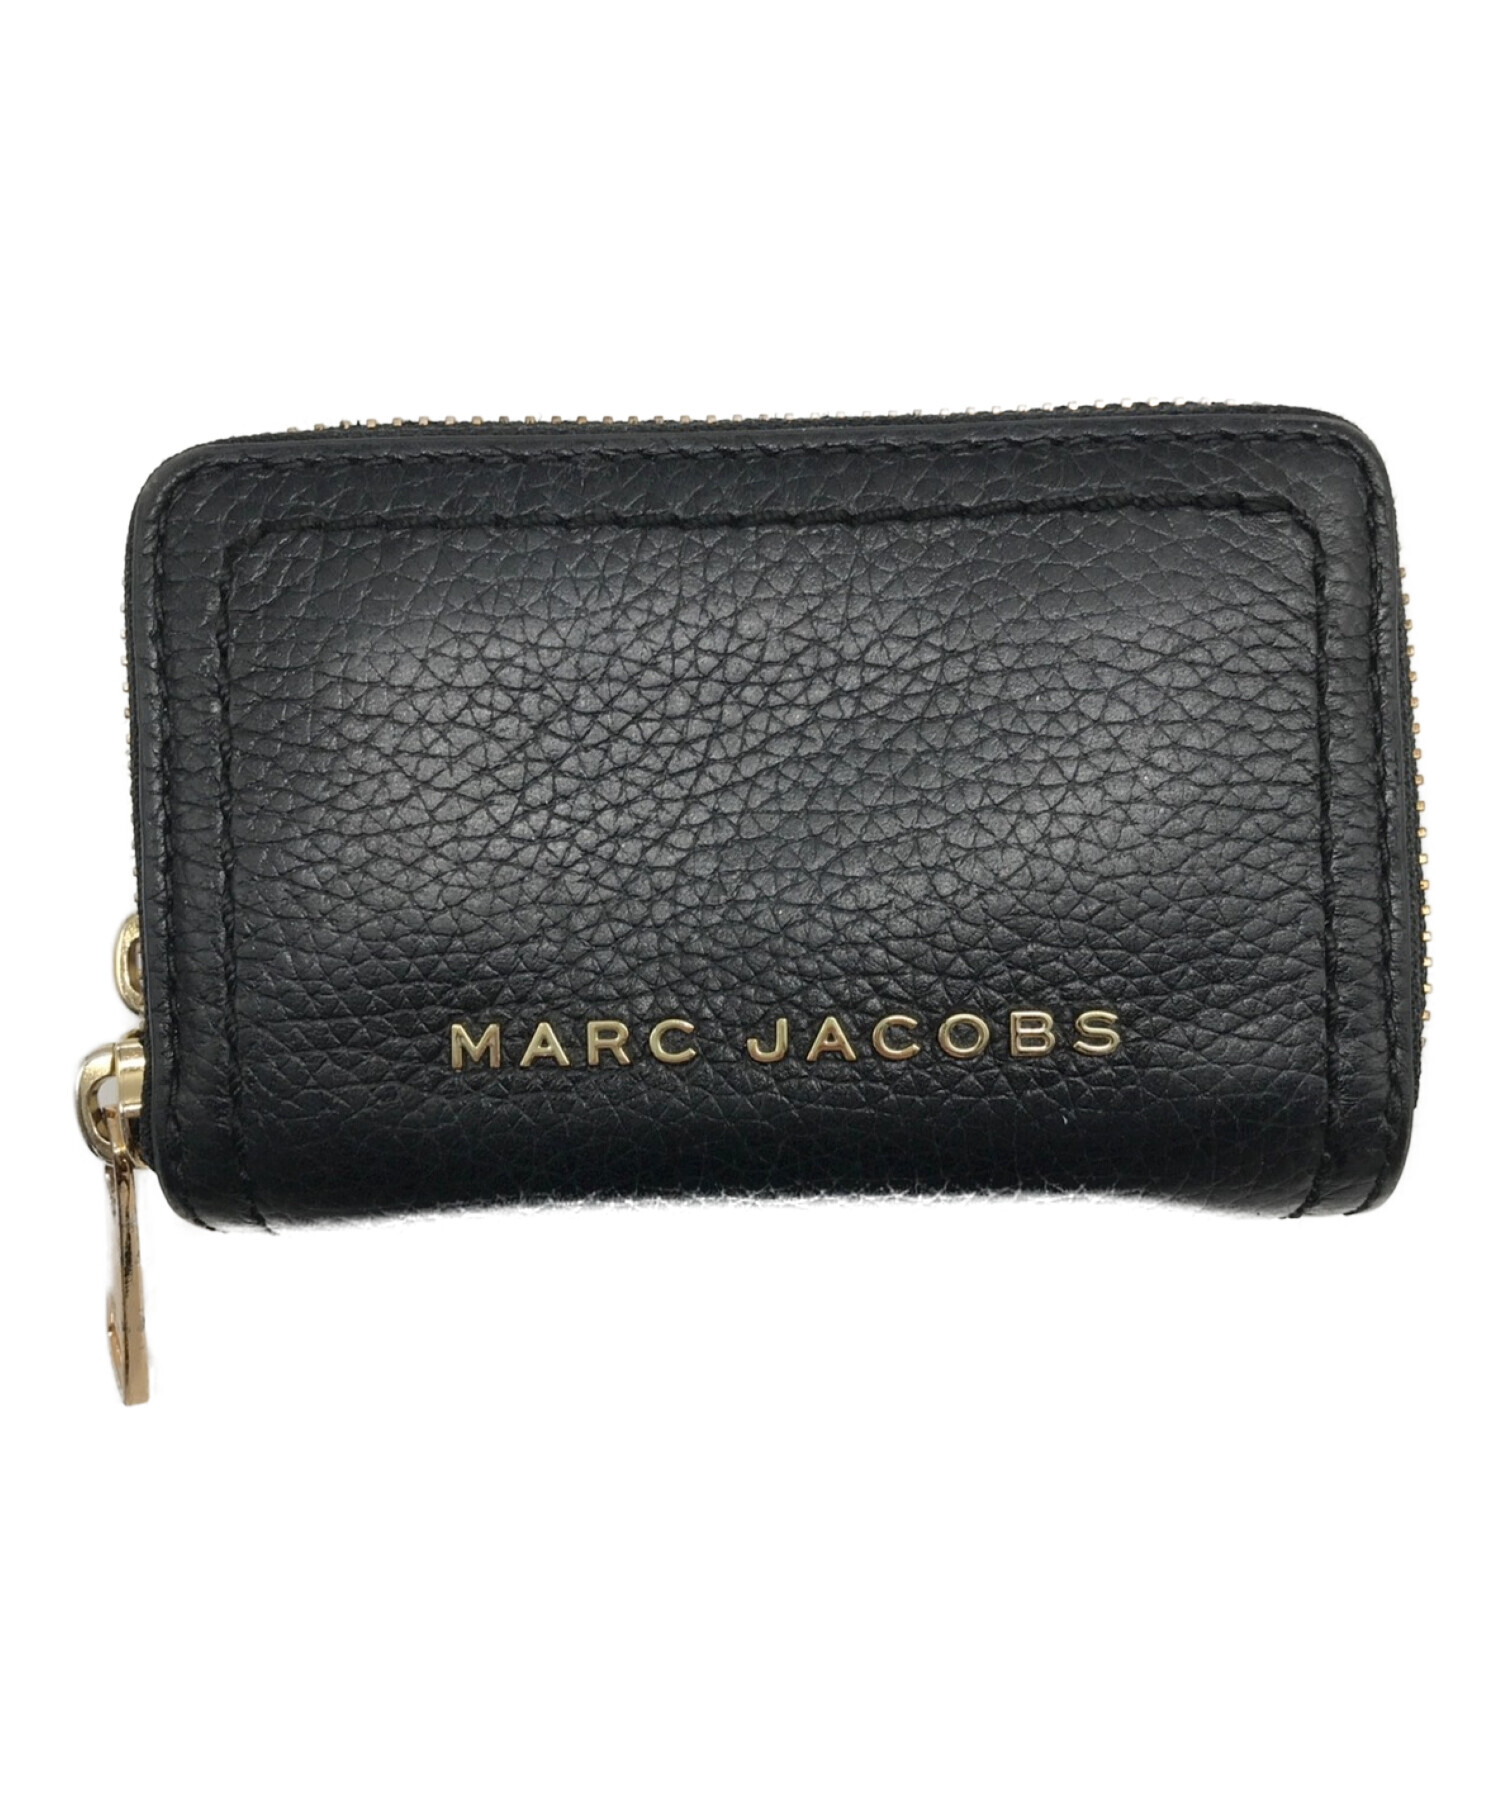 MARC by MARC JACOBS マークバイマークジェイコブス コンパクト財布